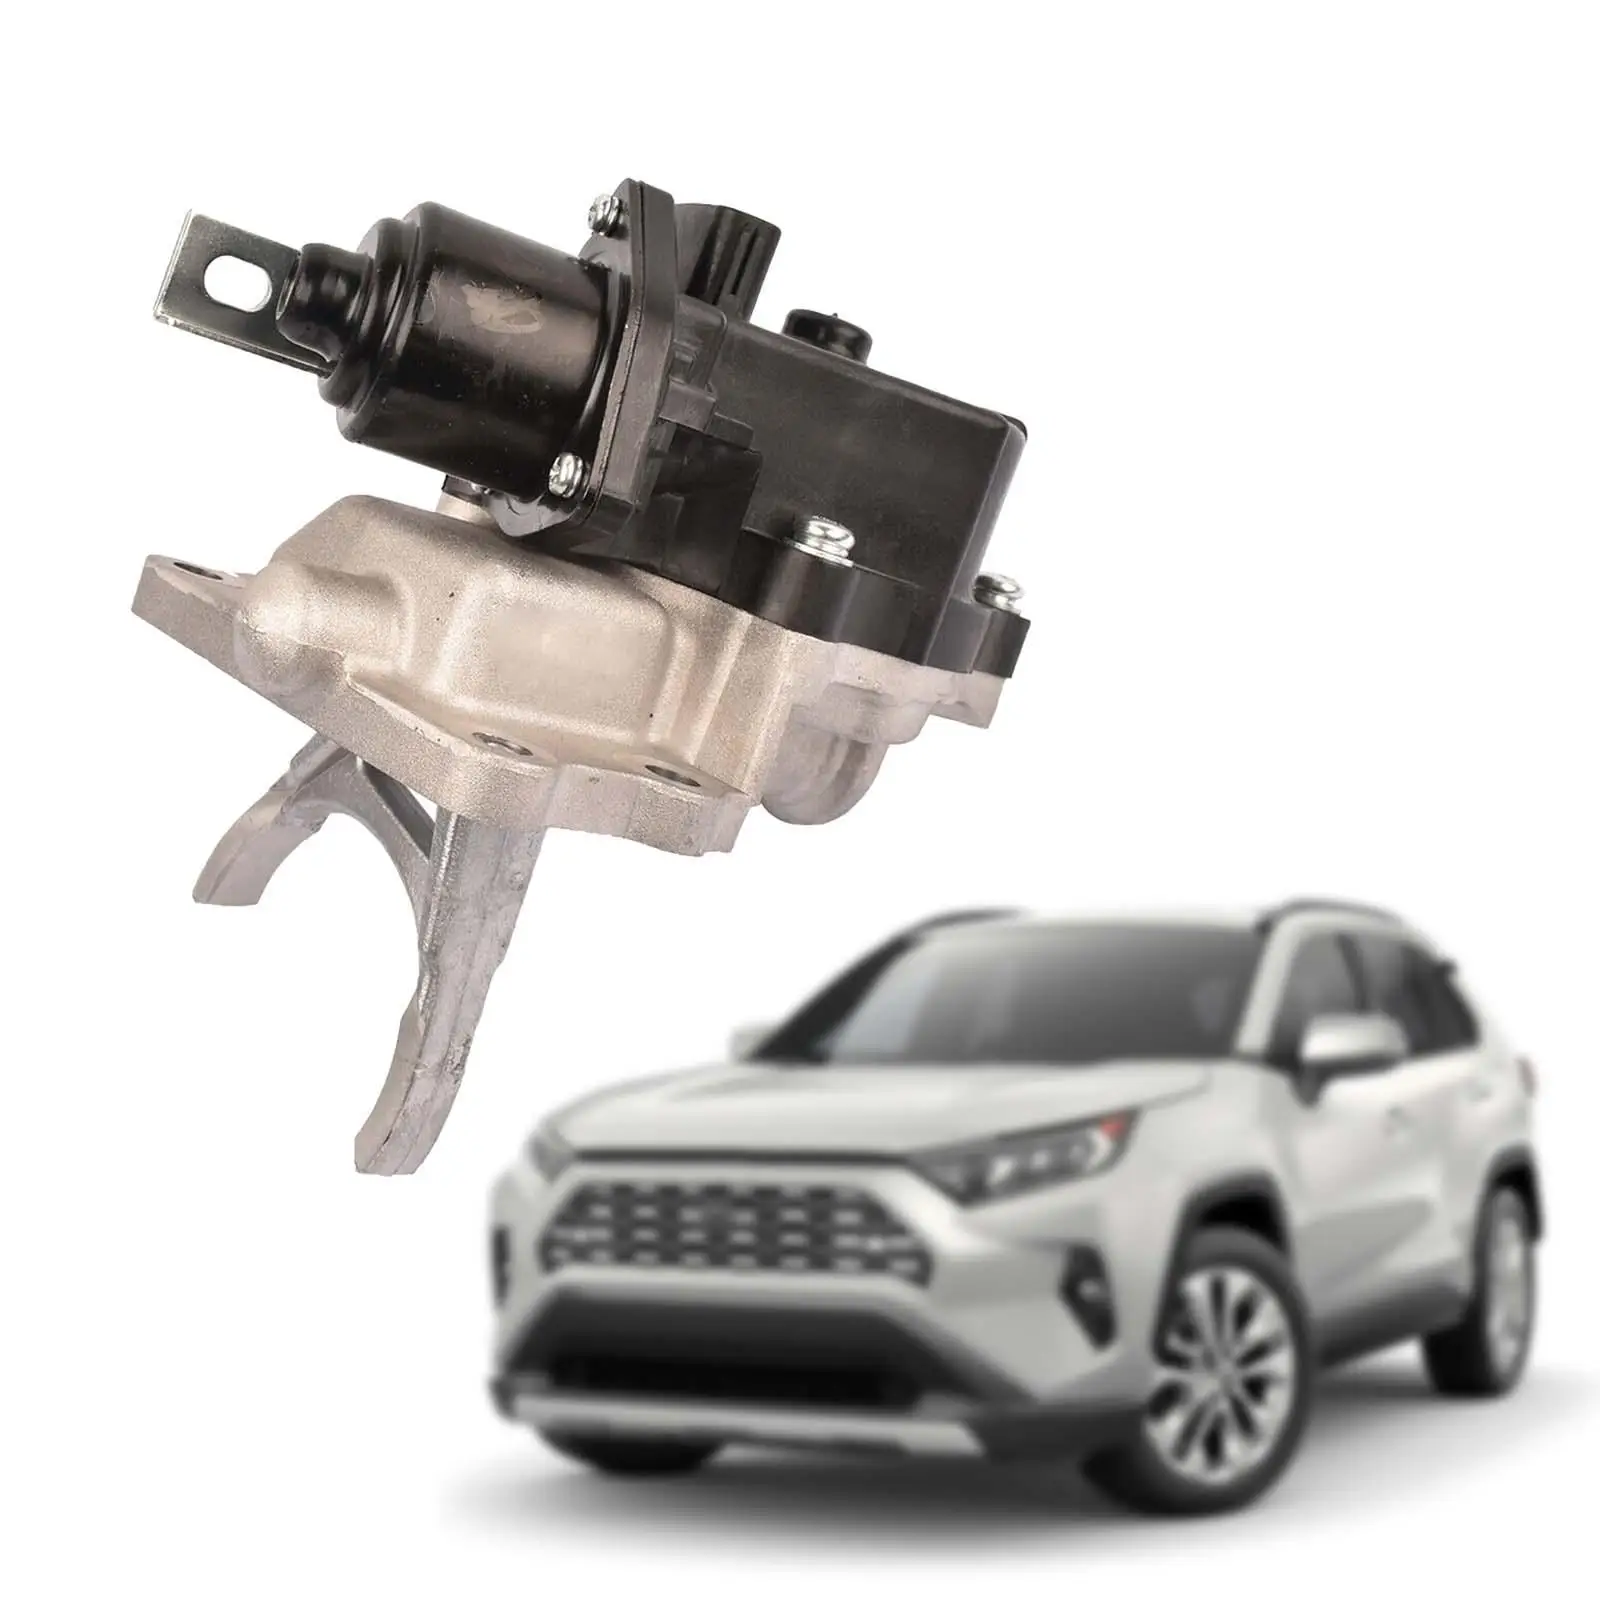 Differential Actuator Assembly Replaces Car Accessories 4140034011 41400-34013 600-410 for Toyota for sequoia 2001-2007